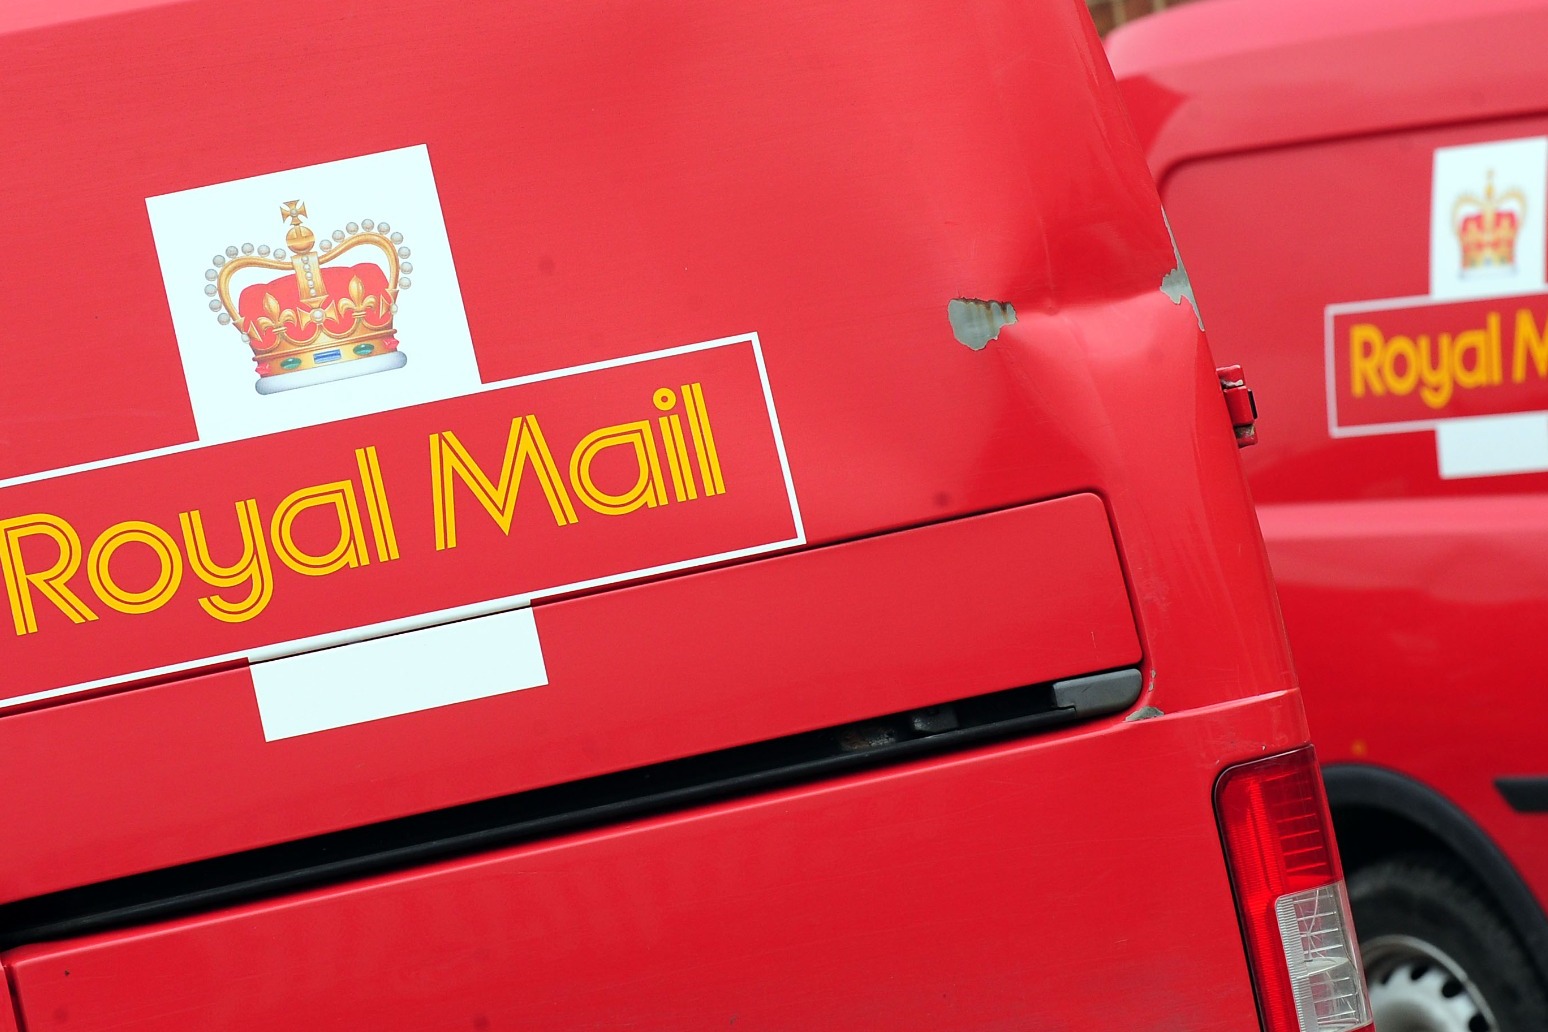 Health concerns raised over plans to cut Royal Mail deliveries